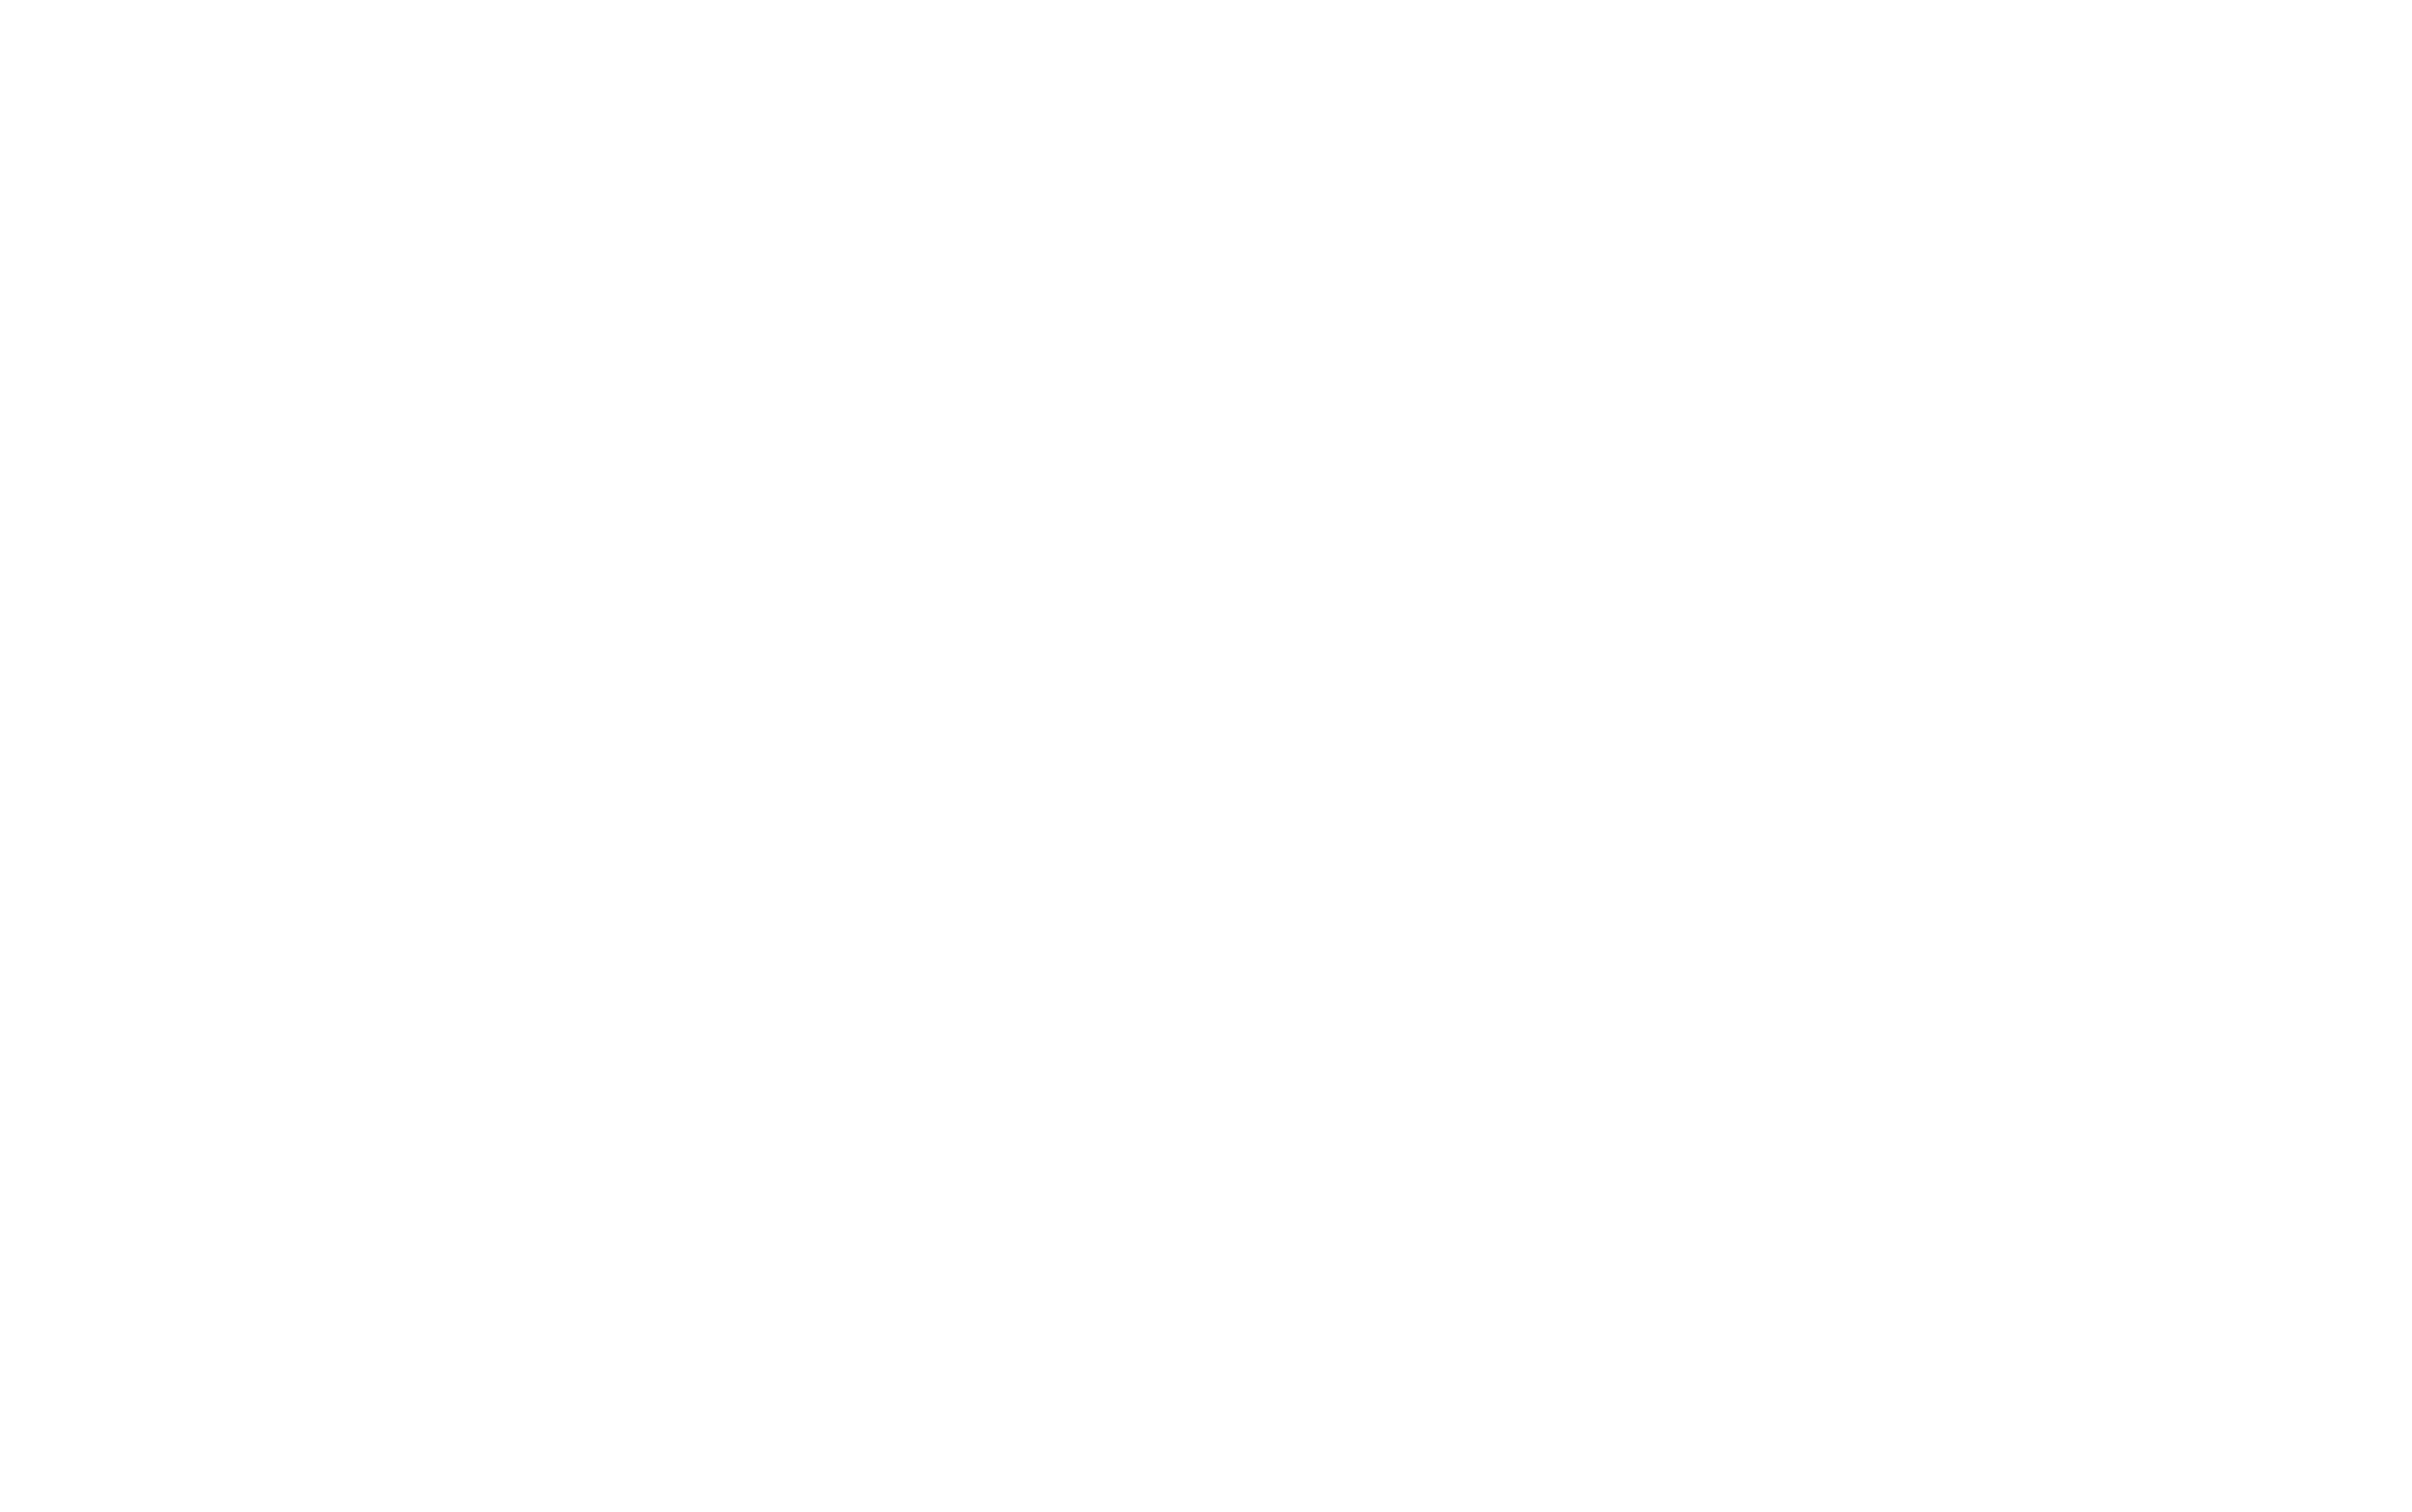 Avid Logo - avid™ hotels - Our brands - InterContinental Hotels Group PLC